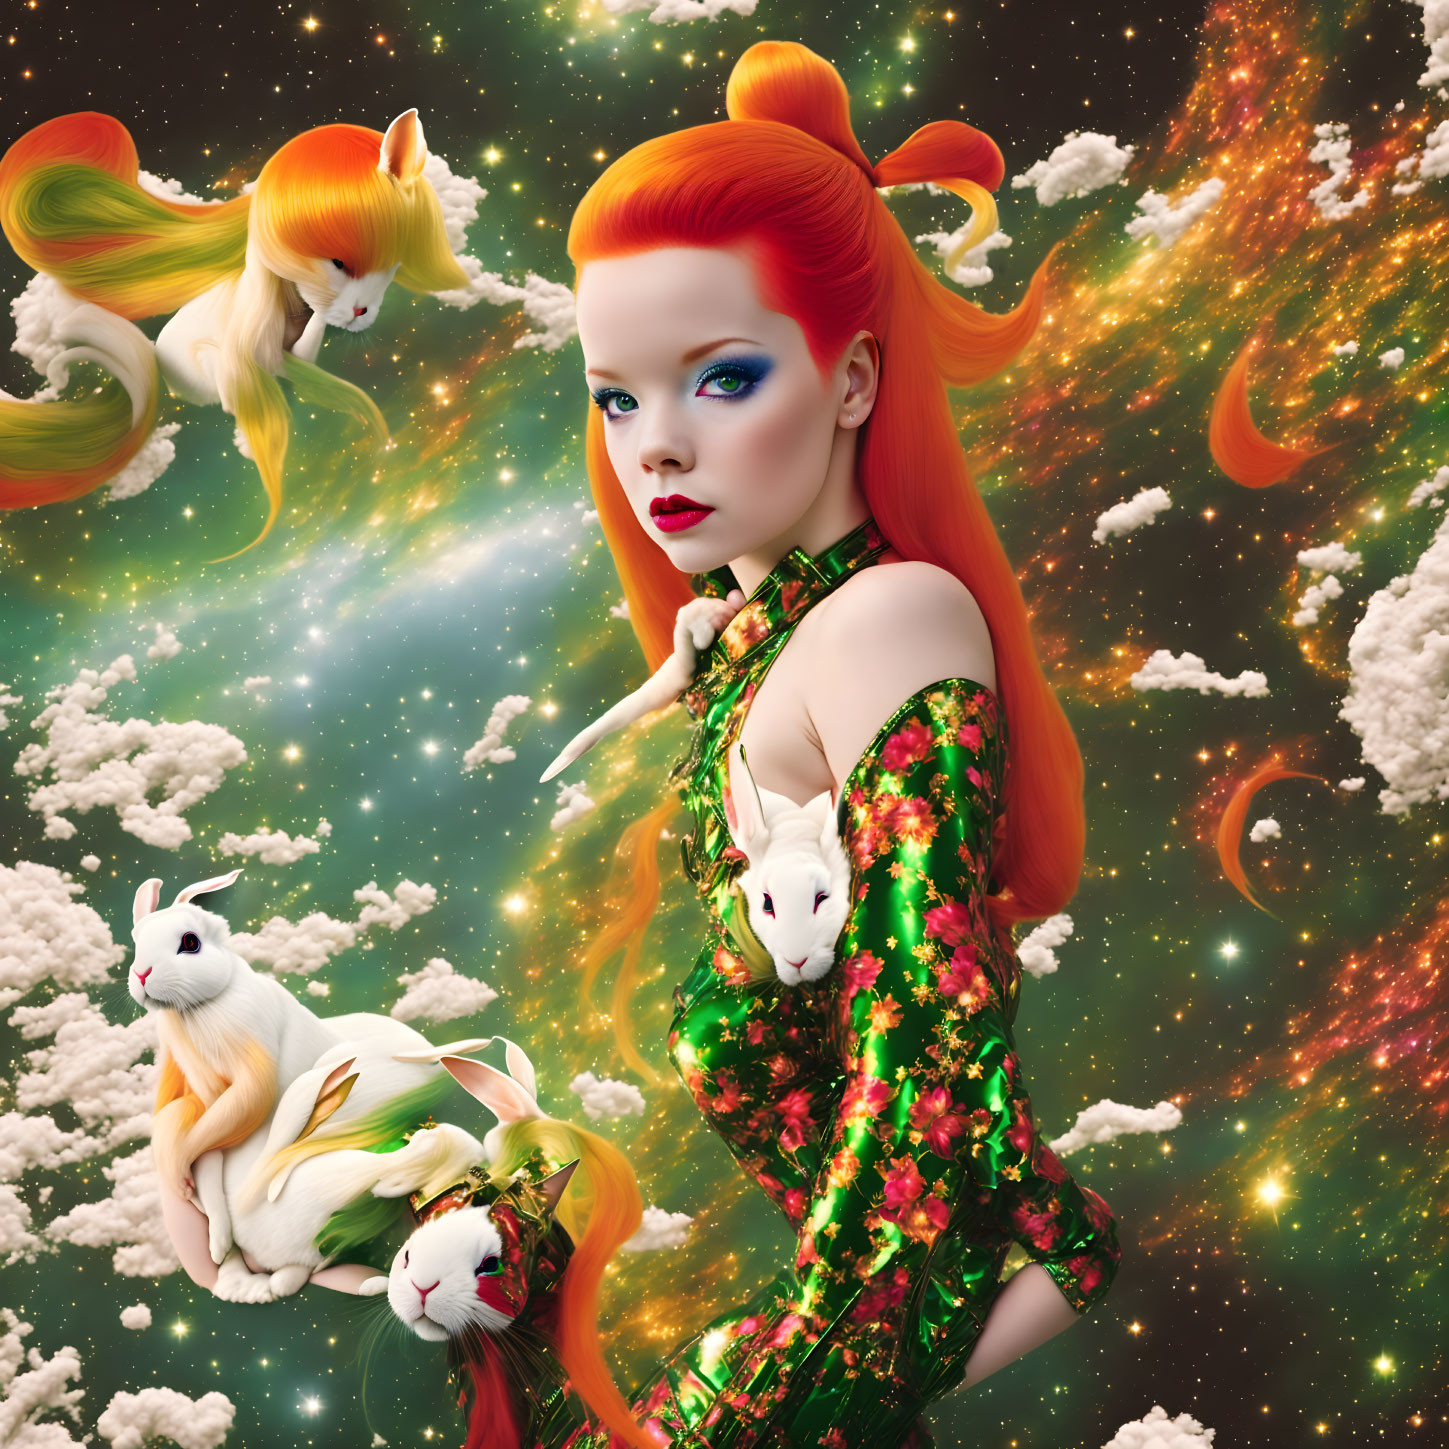 Woman with Red Hair in Green Dress Surrounded by Cosmic Foxes and Stars